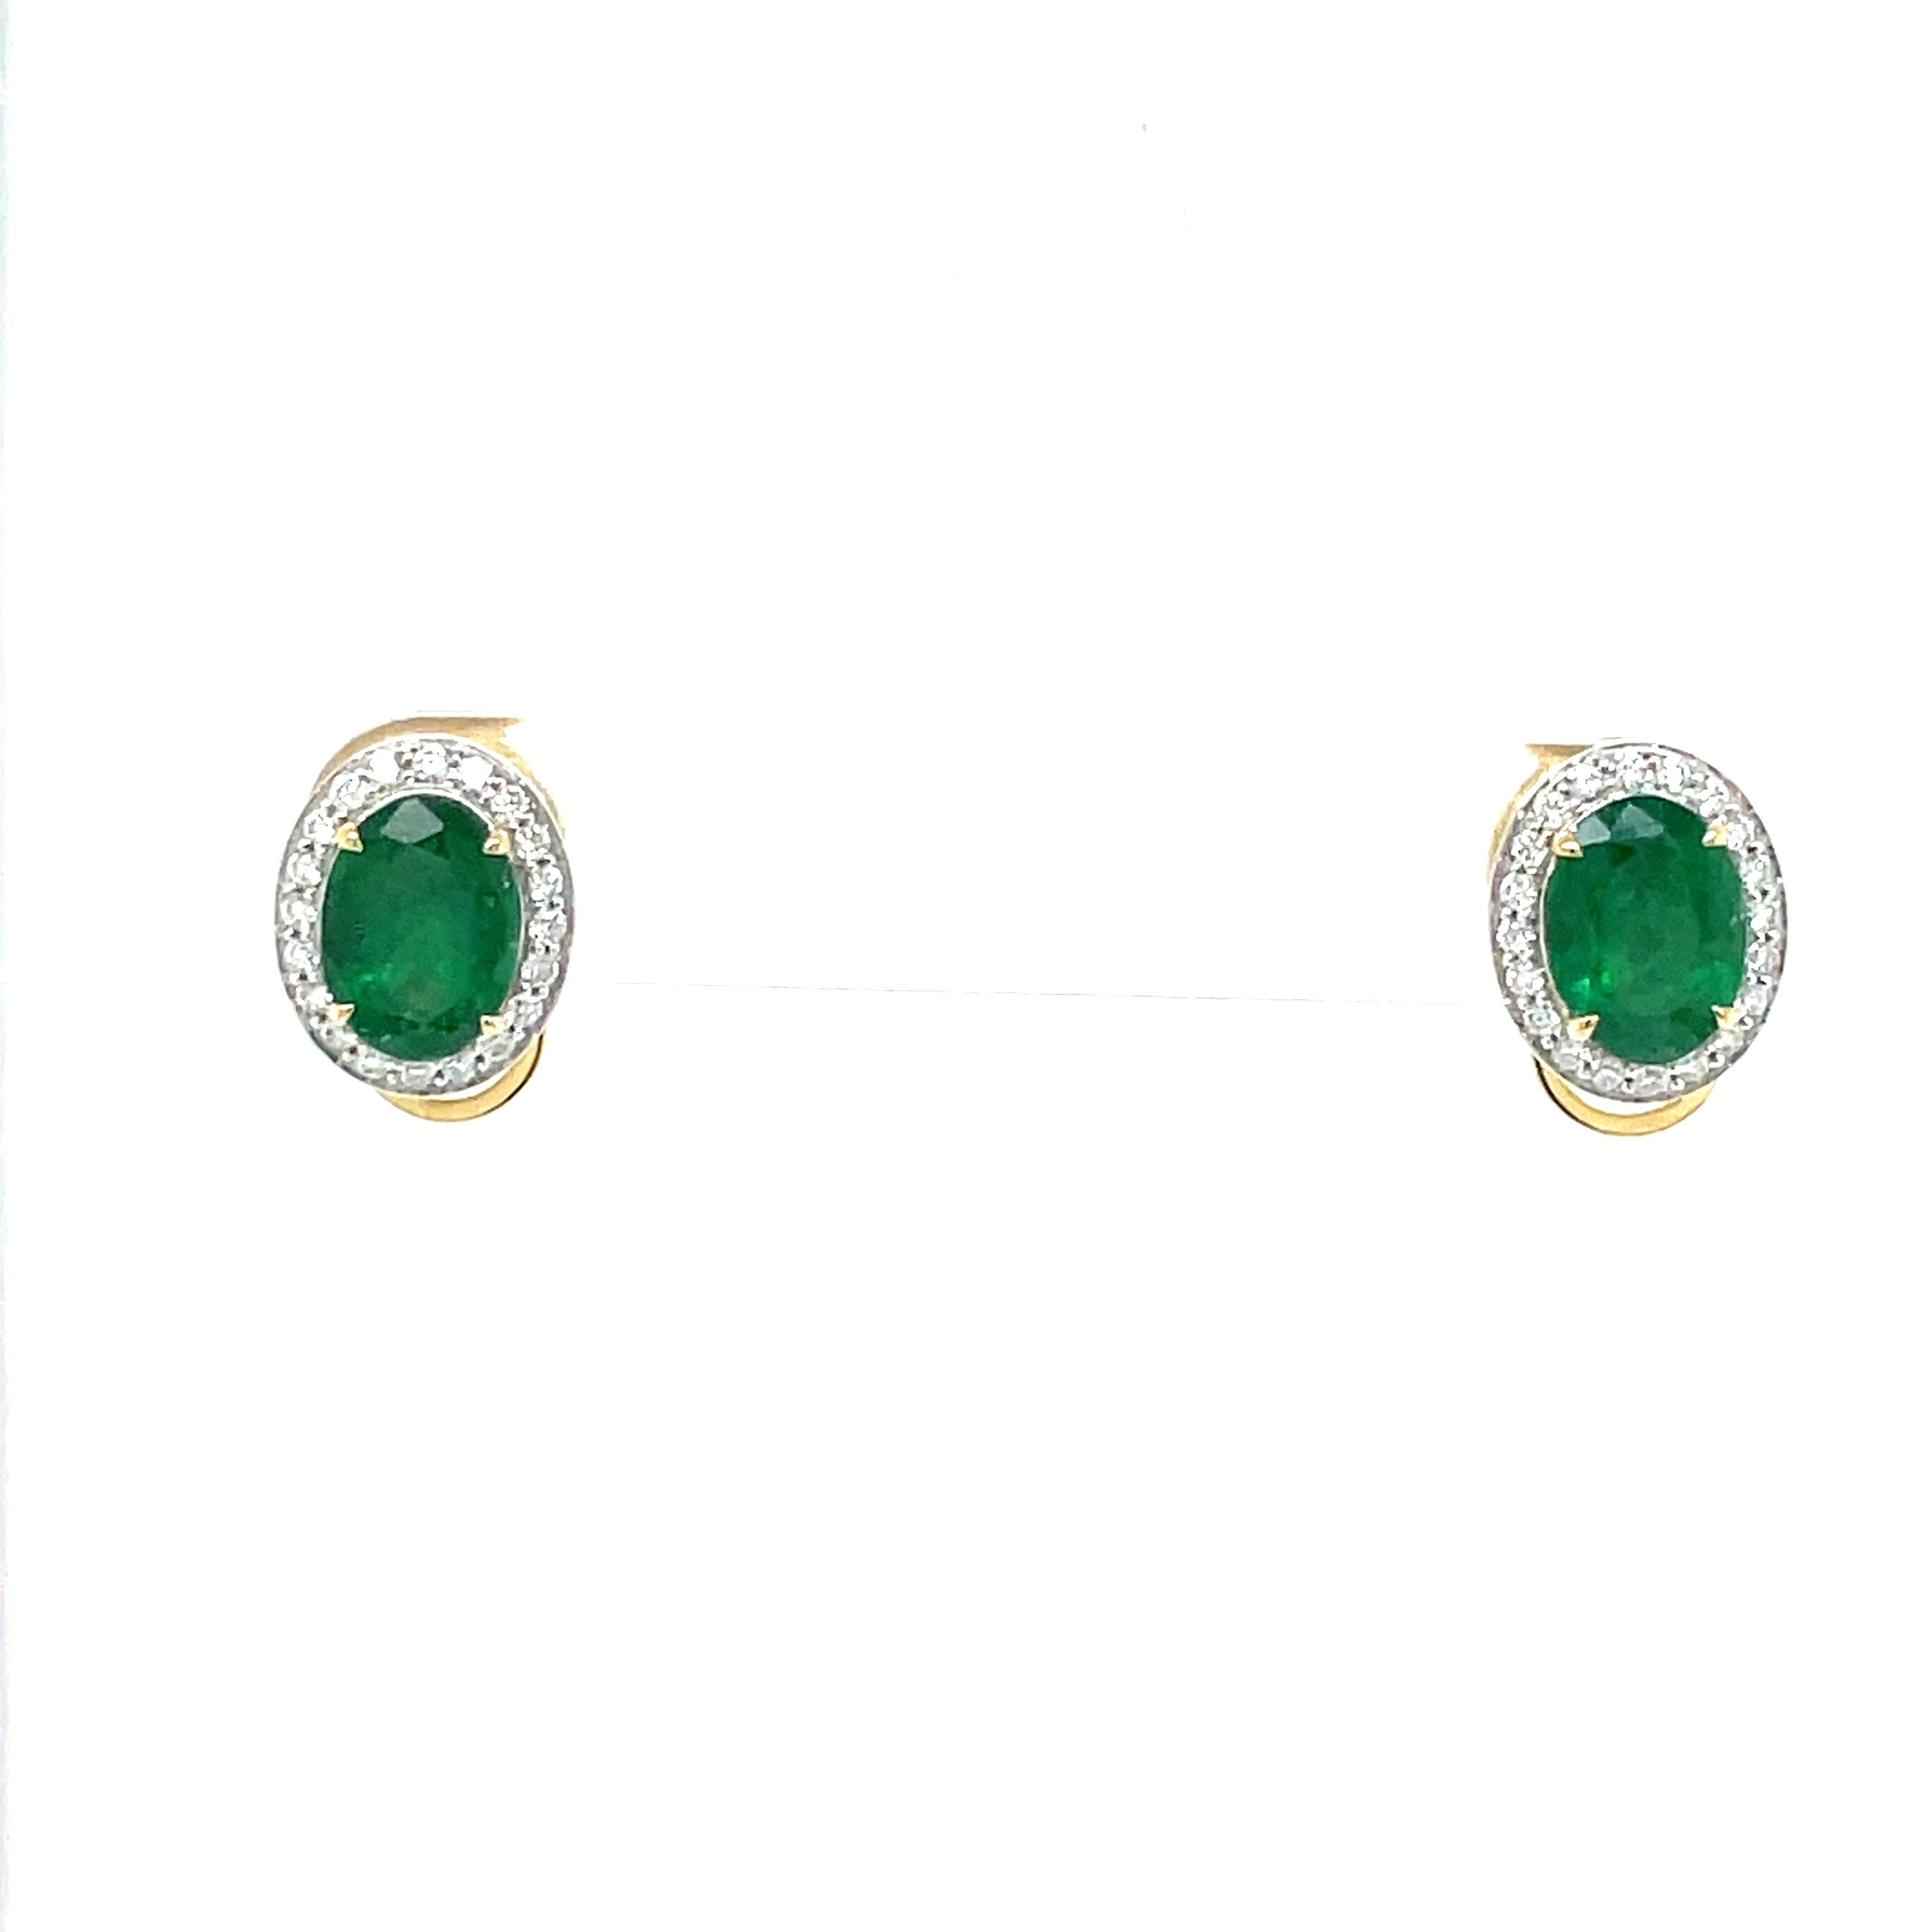 18ct White Gold Emerald and Diamond Stud Earrings